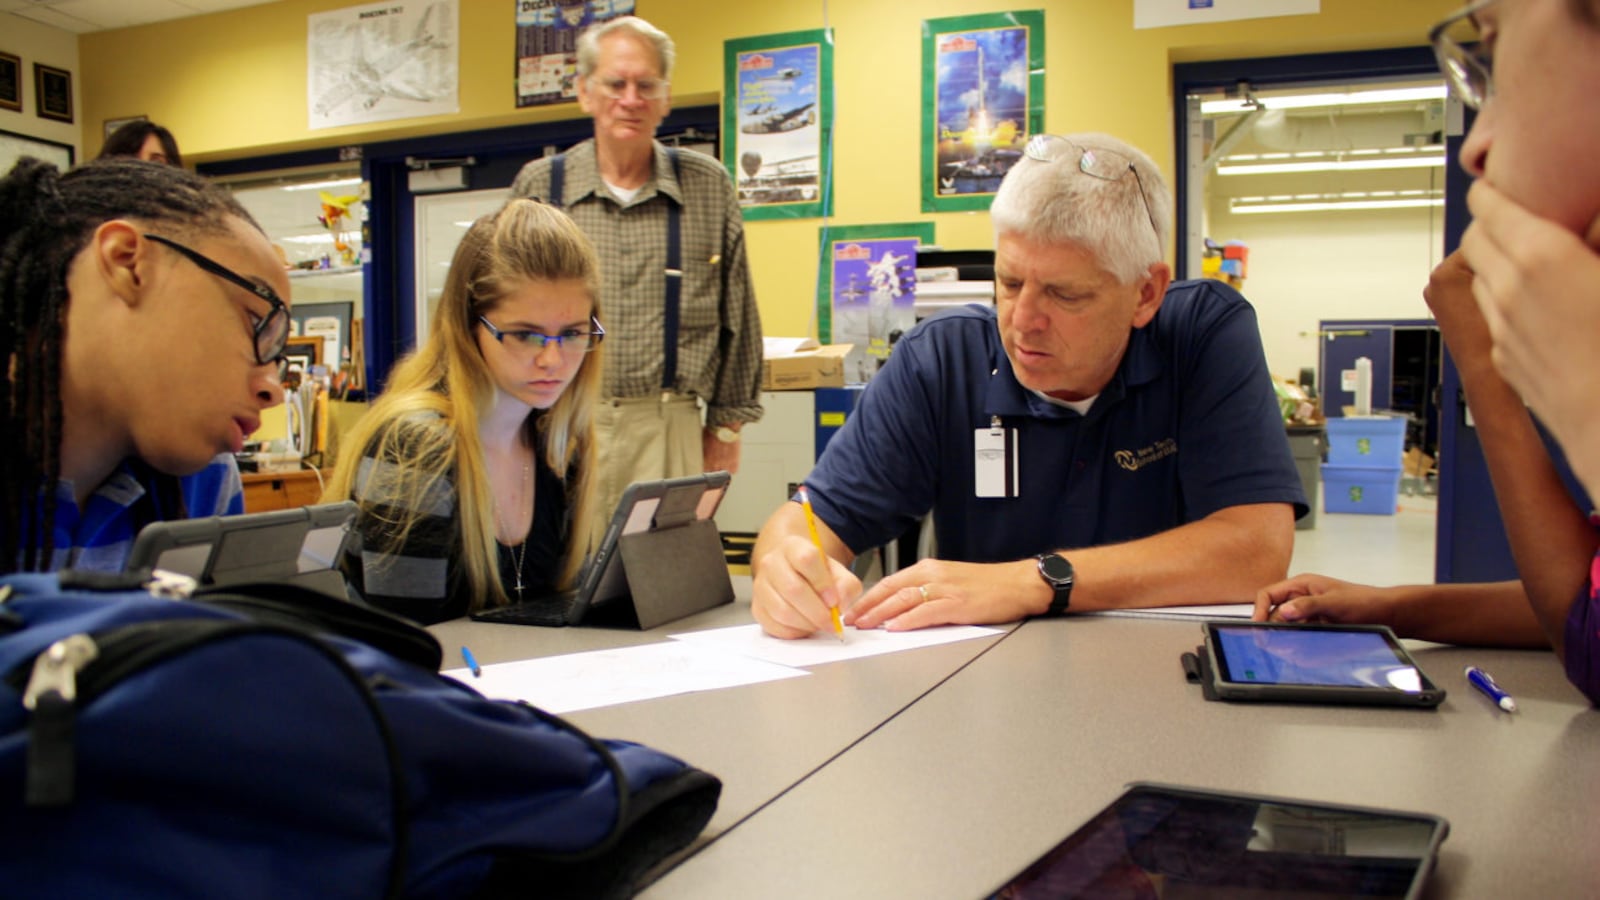 Students in Decatur Township work on physics problems with their teacher.